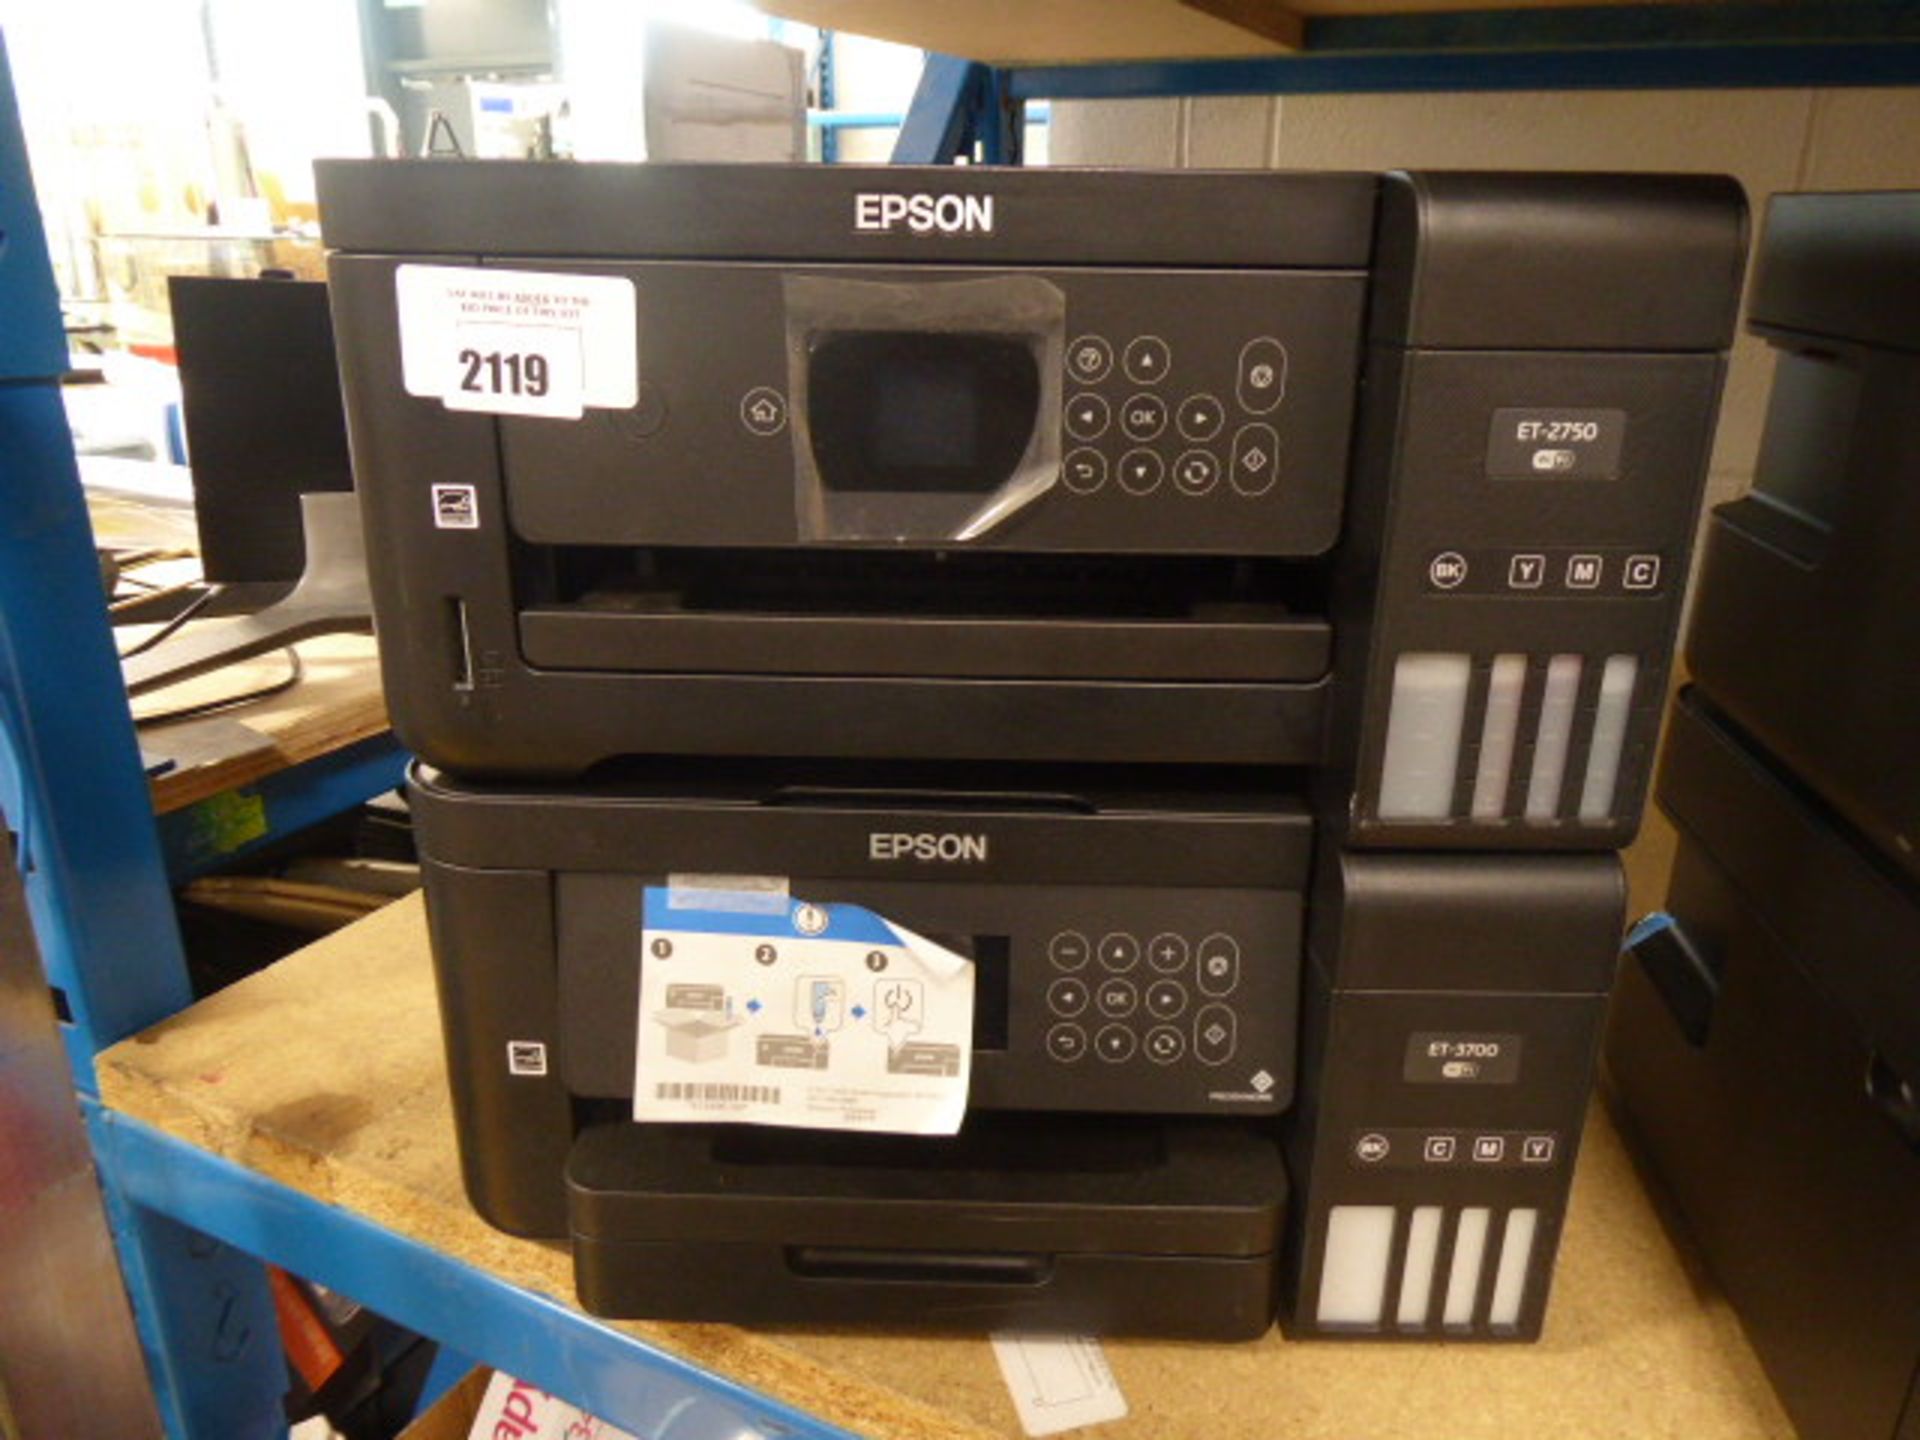 2 Epson ET2750 all in one printers